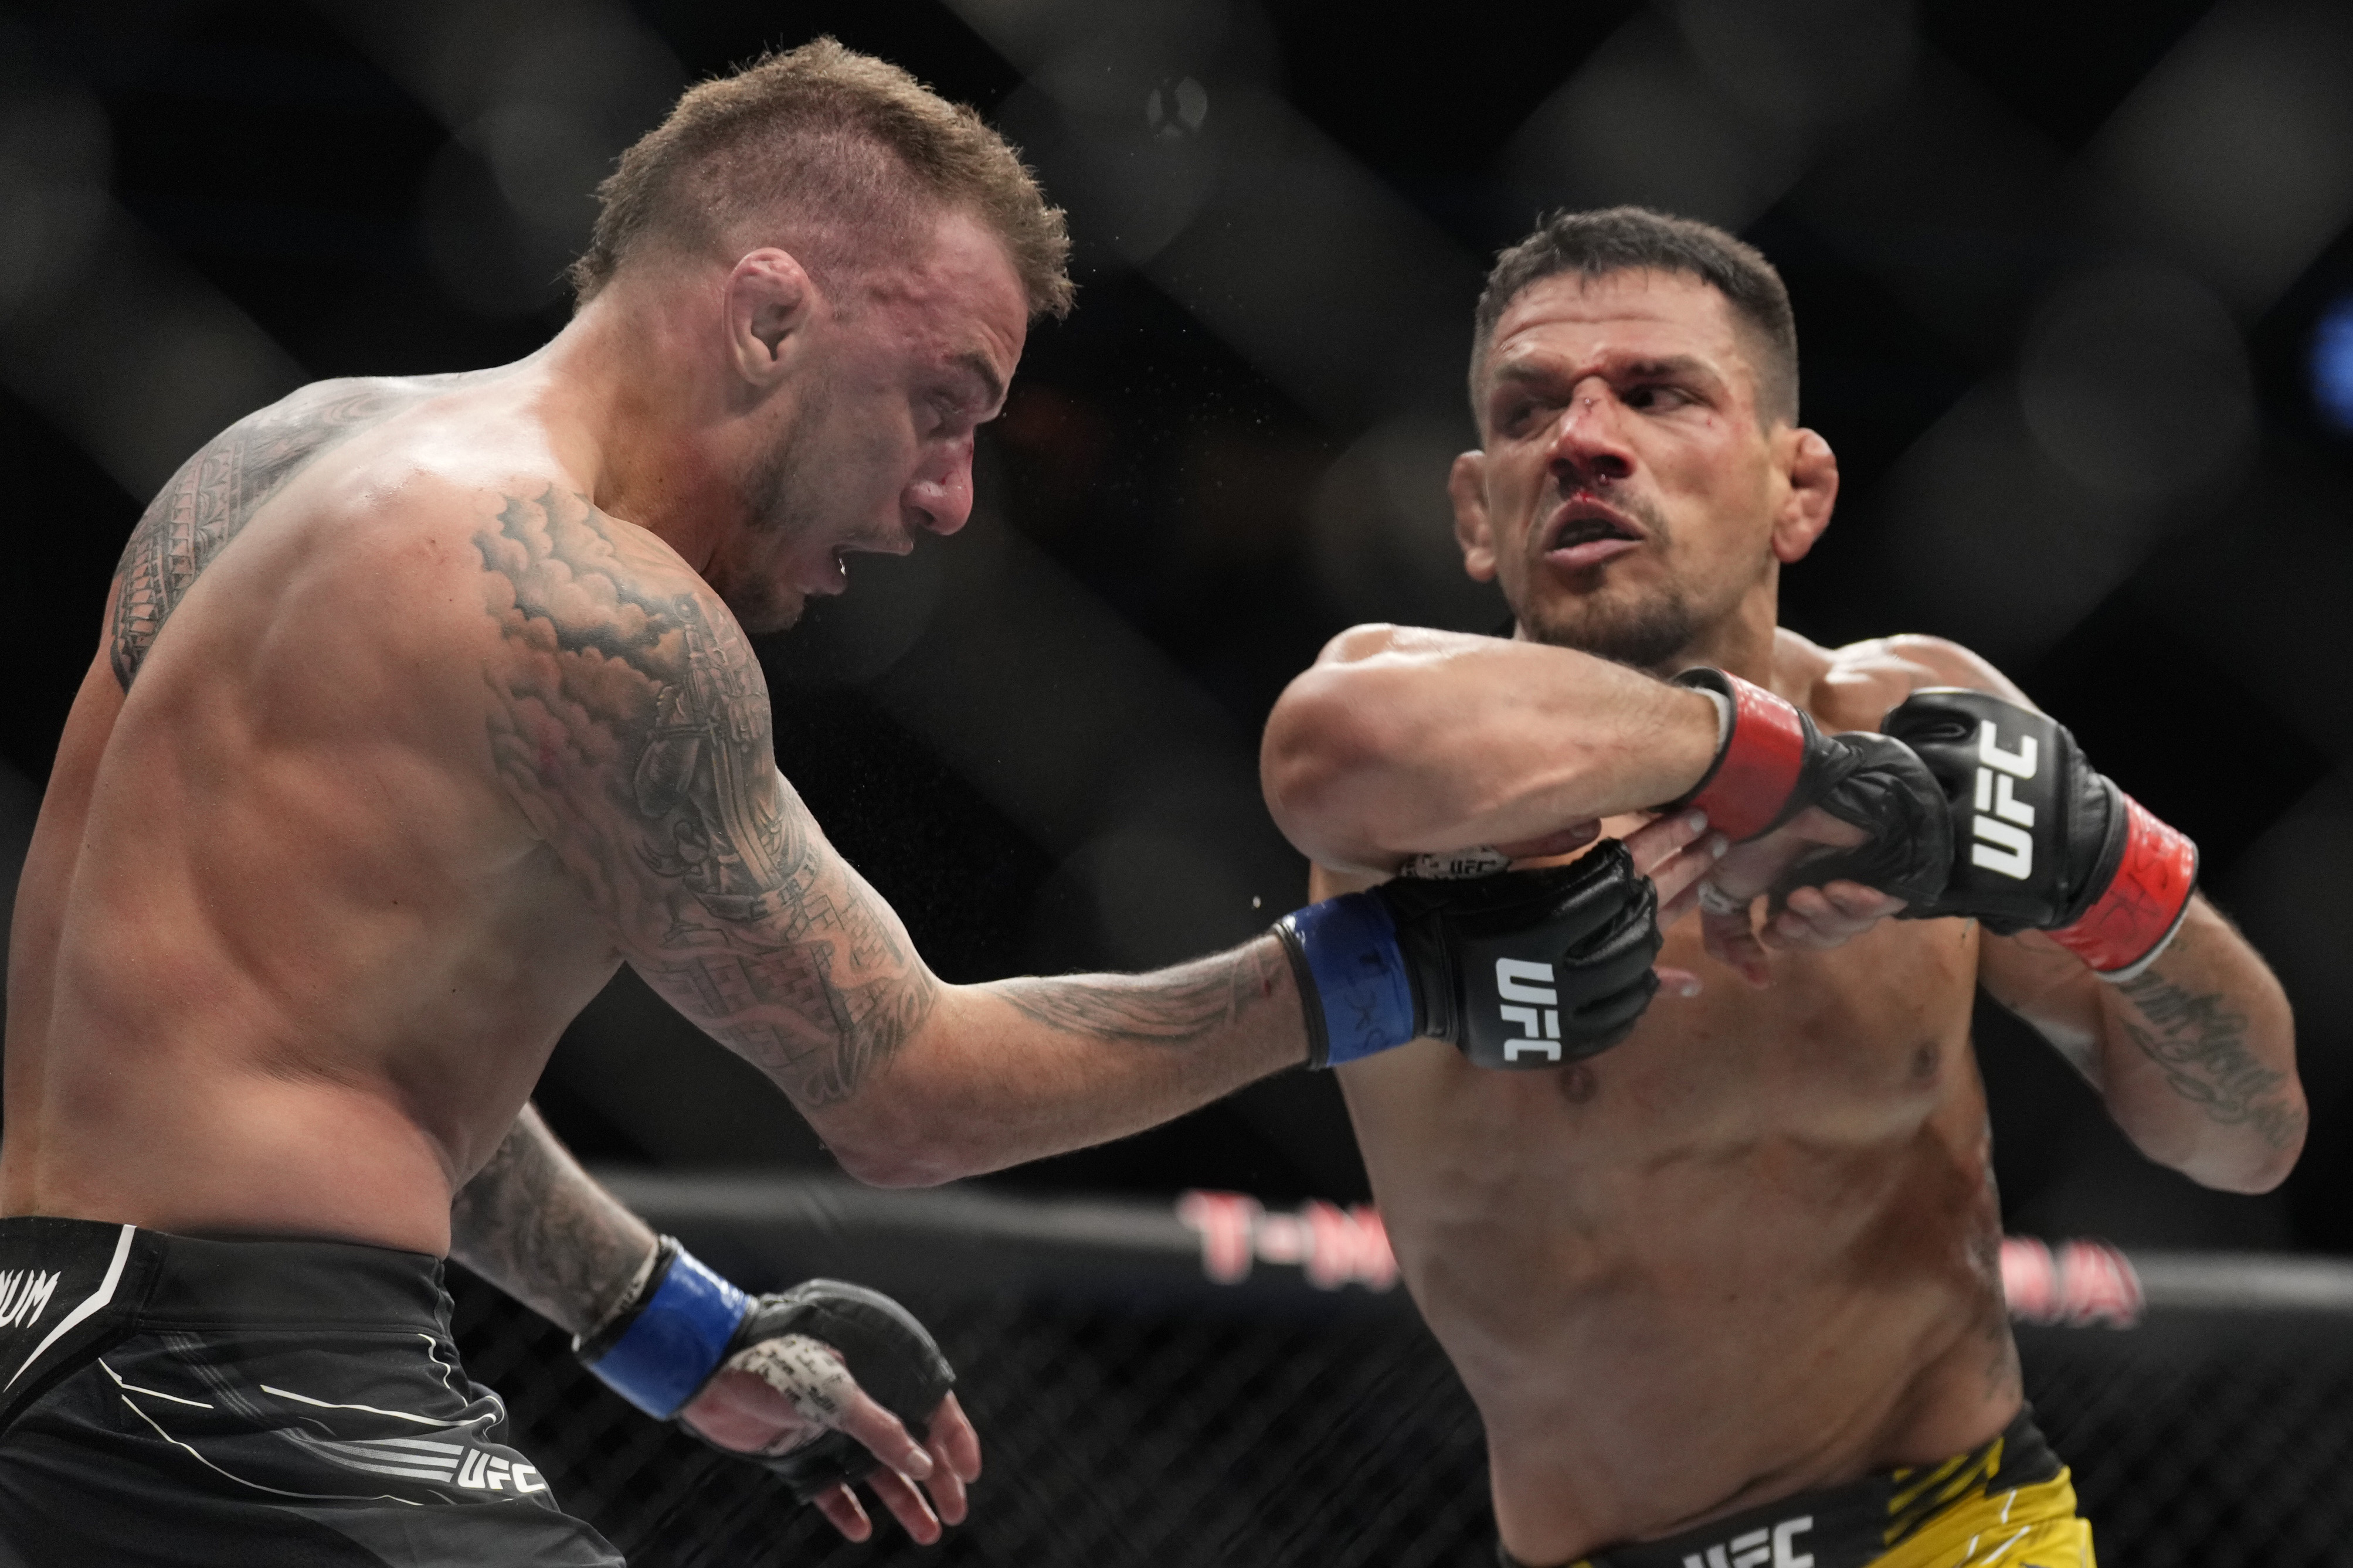 Rafael dos Anjos put a beating on Renato Moicano in the UFC 272 PPV co-main event